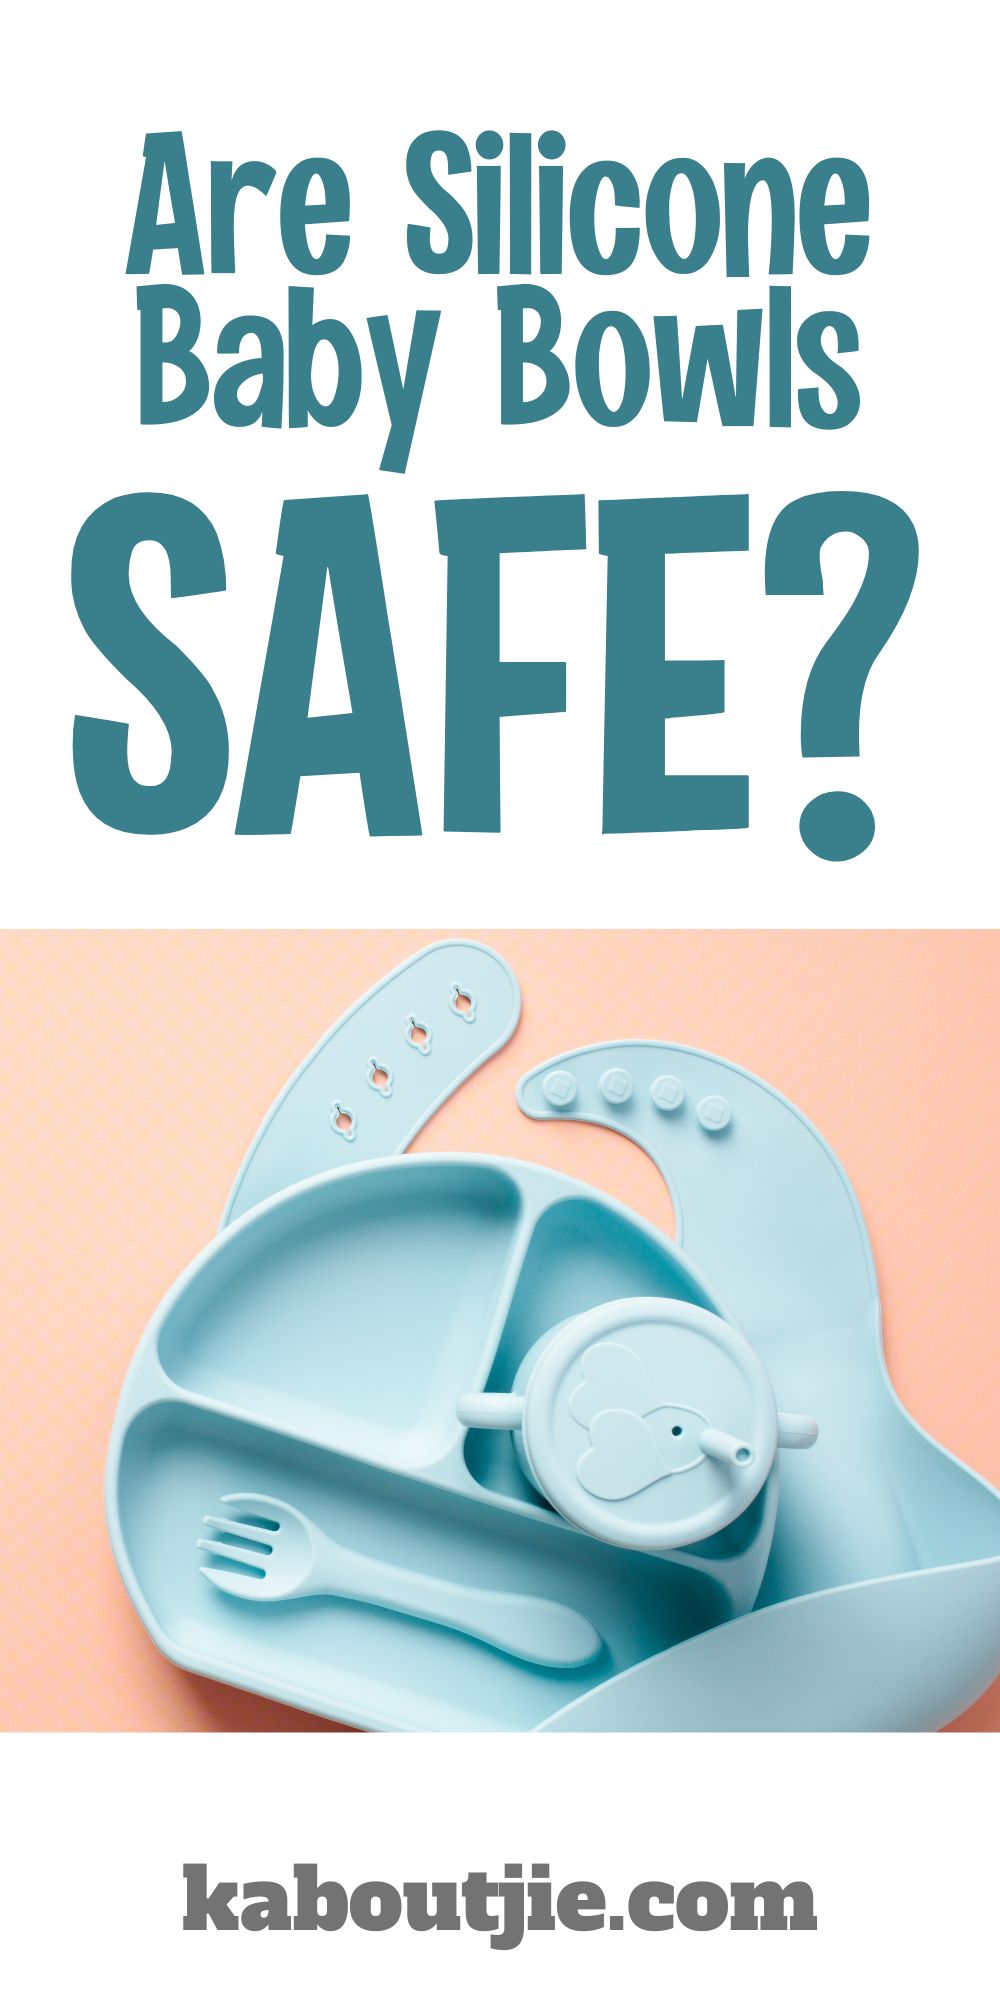 Are Silicone Baby Bowls Safe?